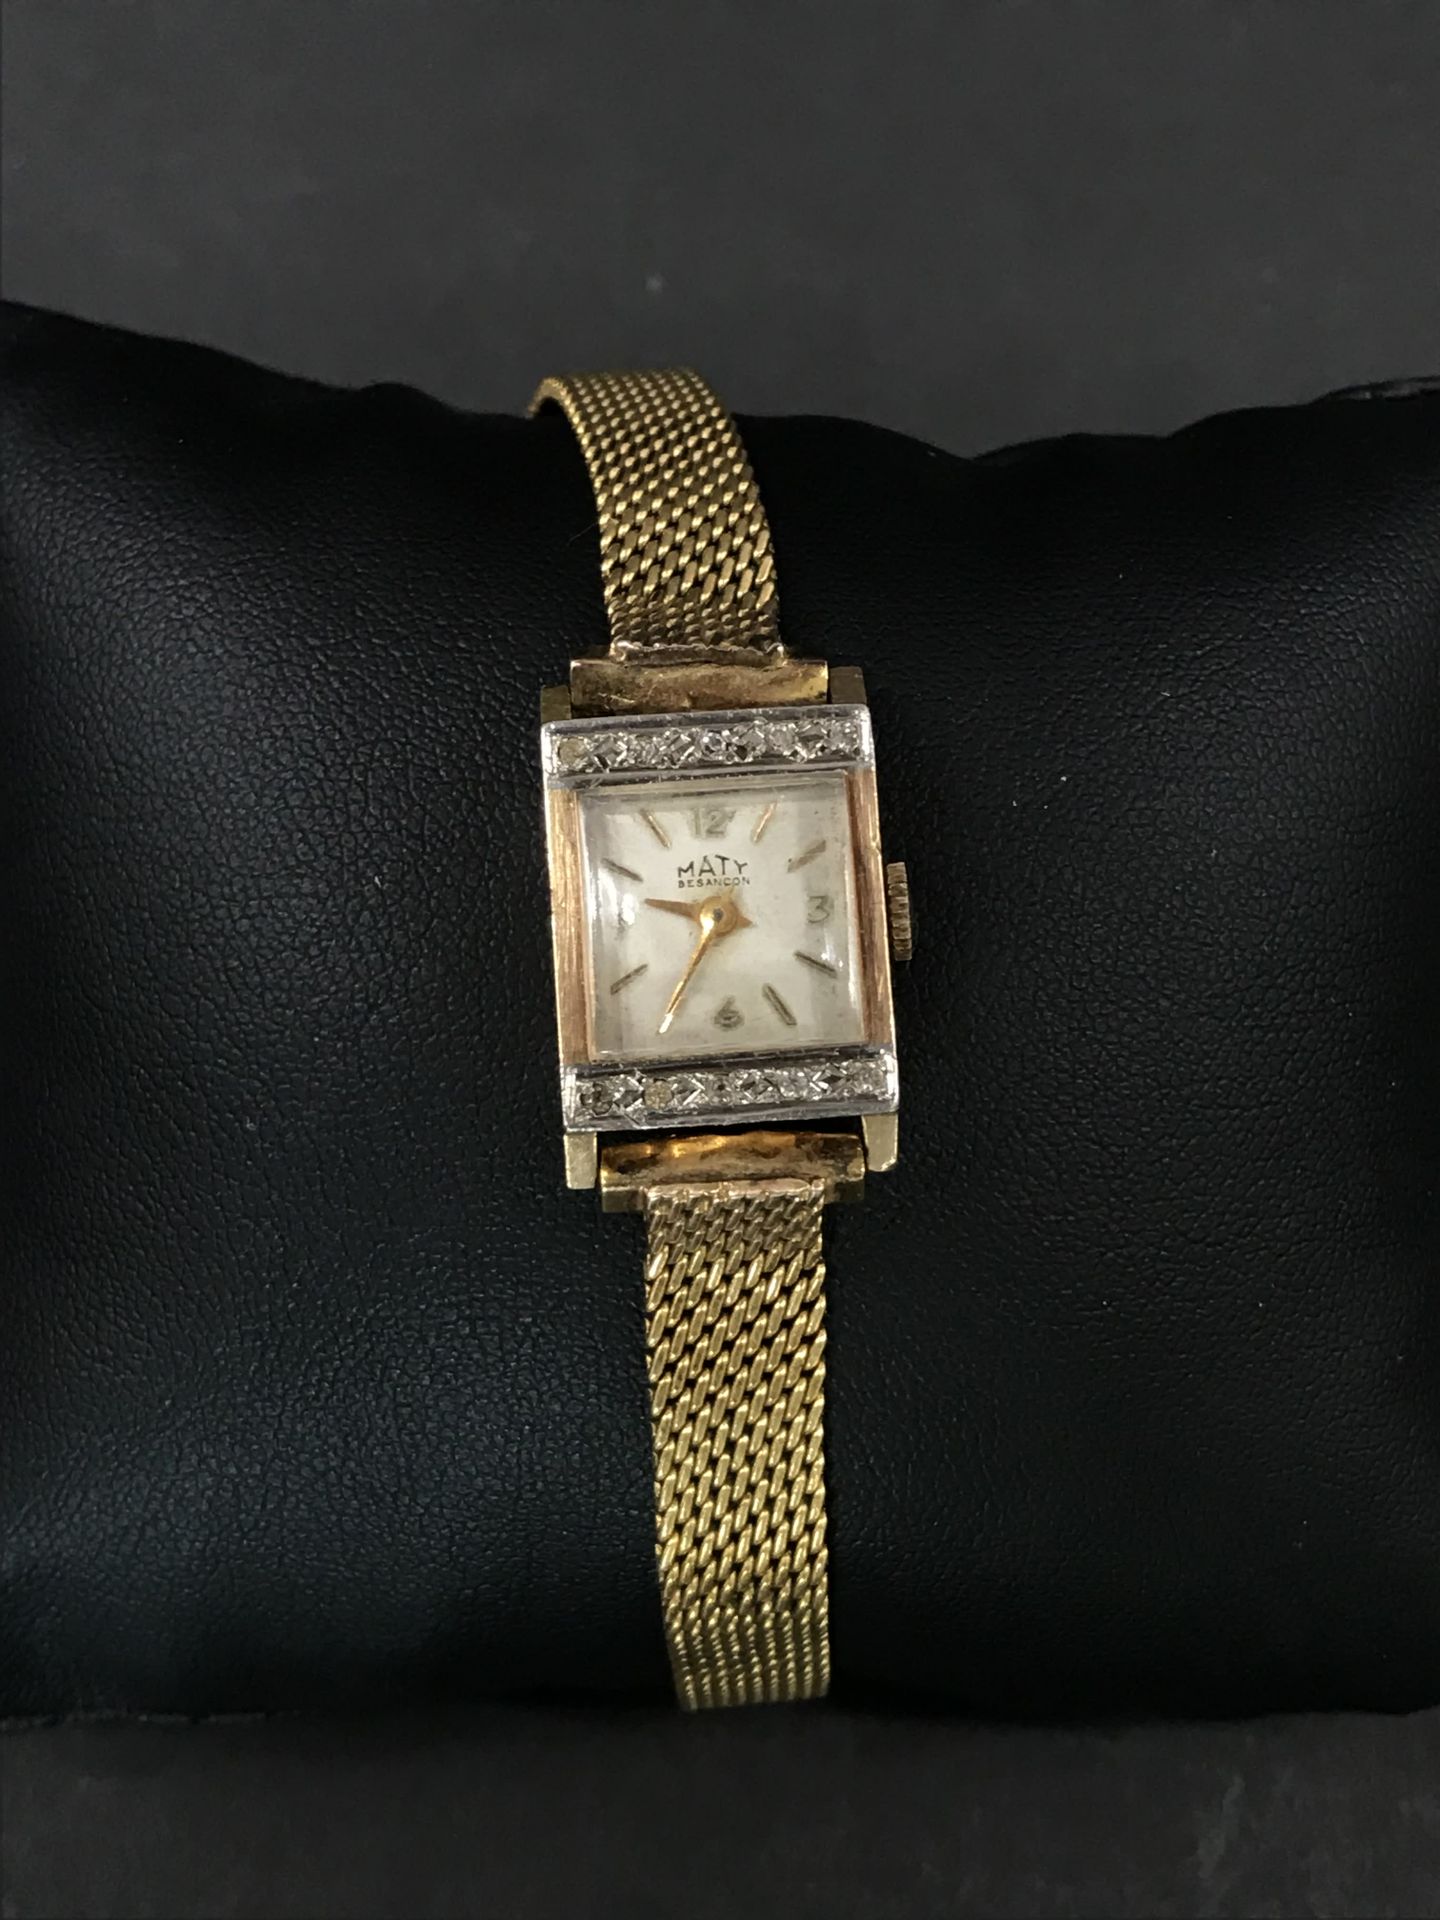 Null MATY LADY'S WATCH

yellow gold case set with small diamonds

Marked with an&hellip;